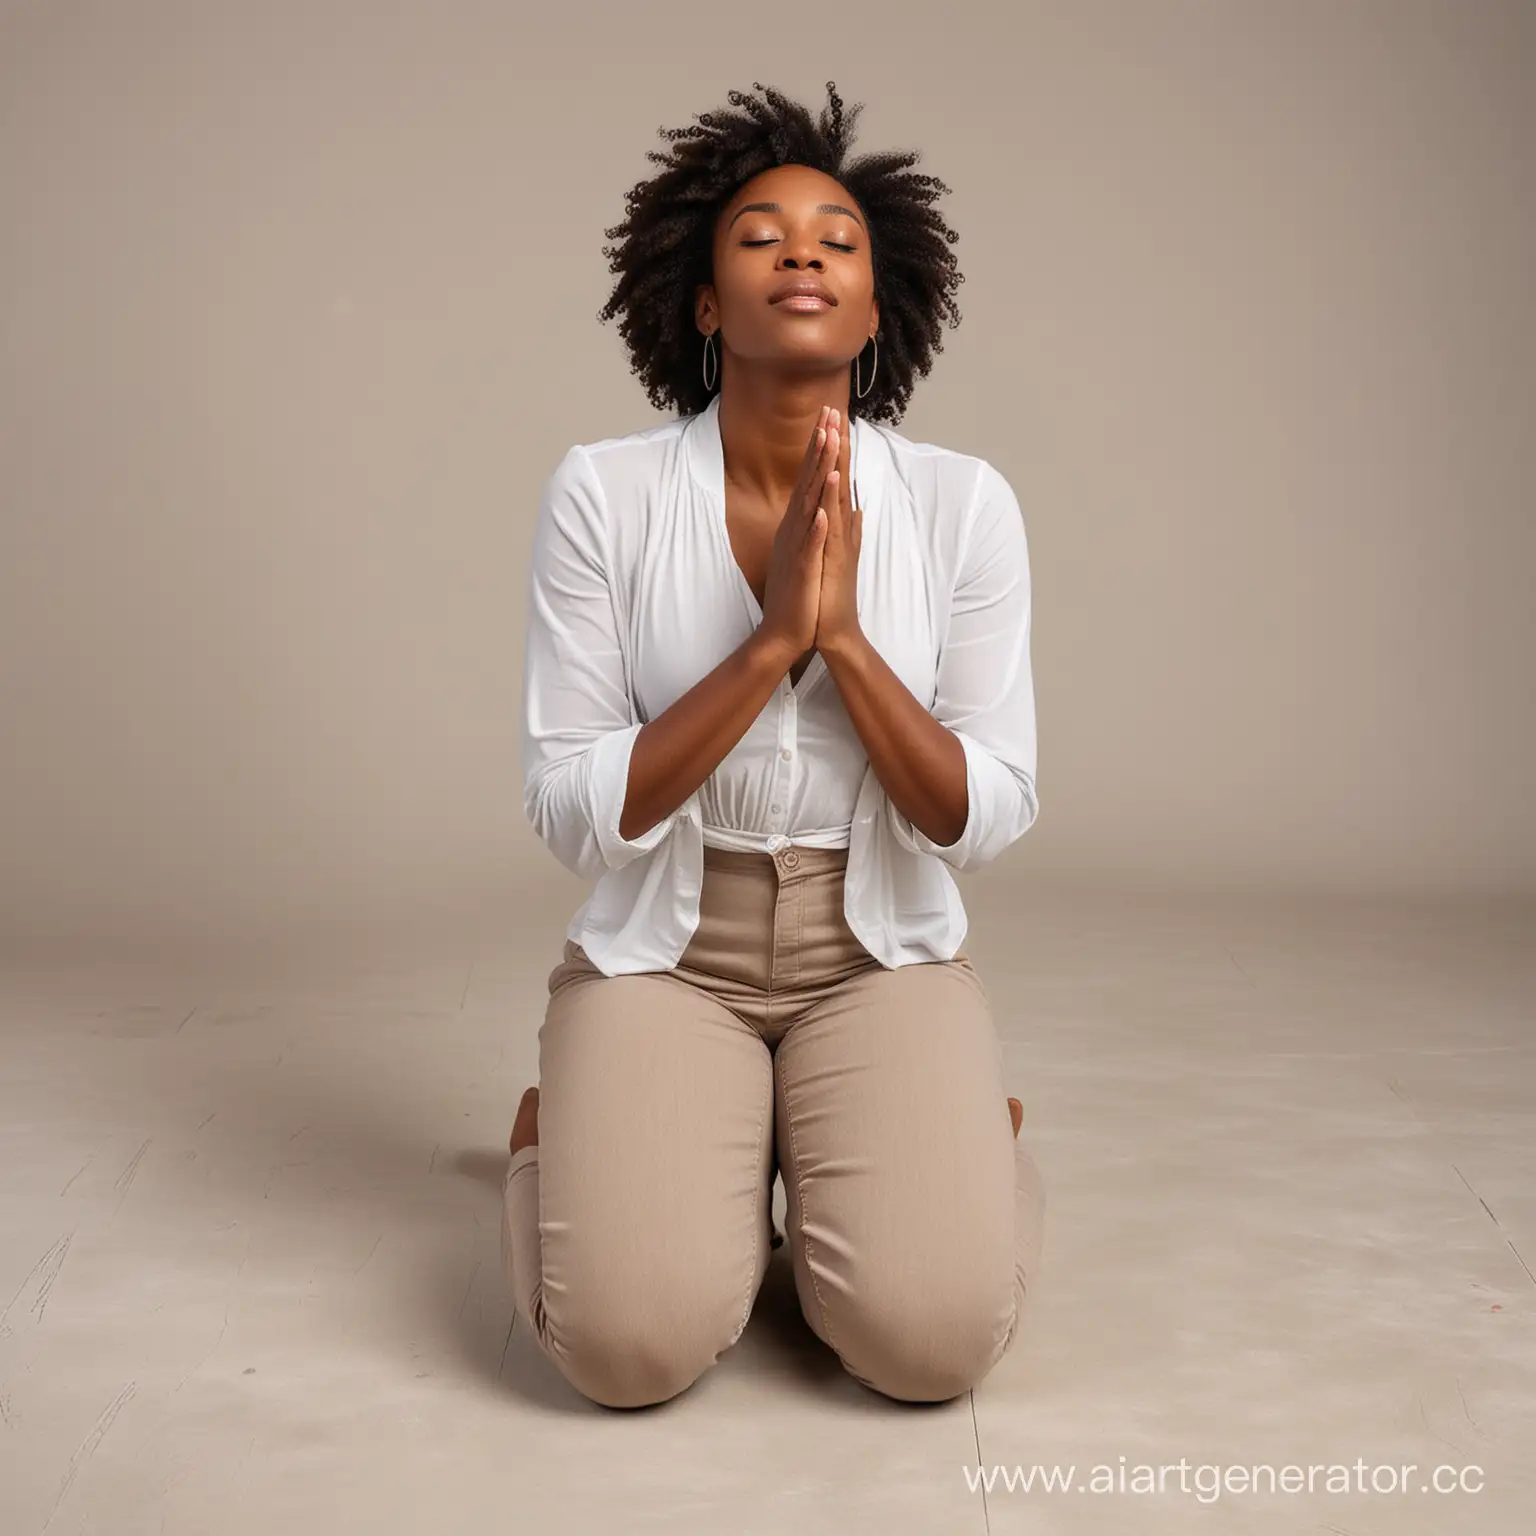 Young-Black-Woman-in-Prayer-Pose-Sitting-and-Kissing-the-Air